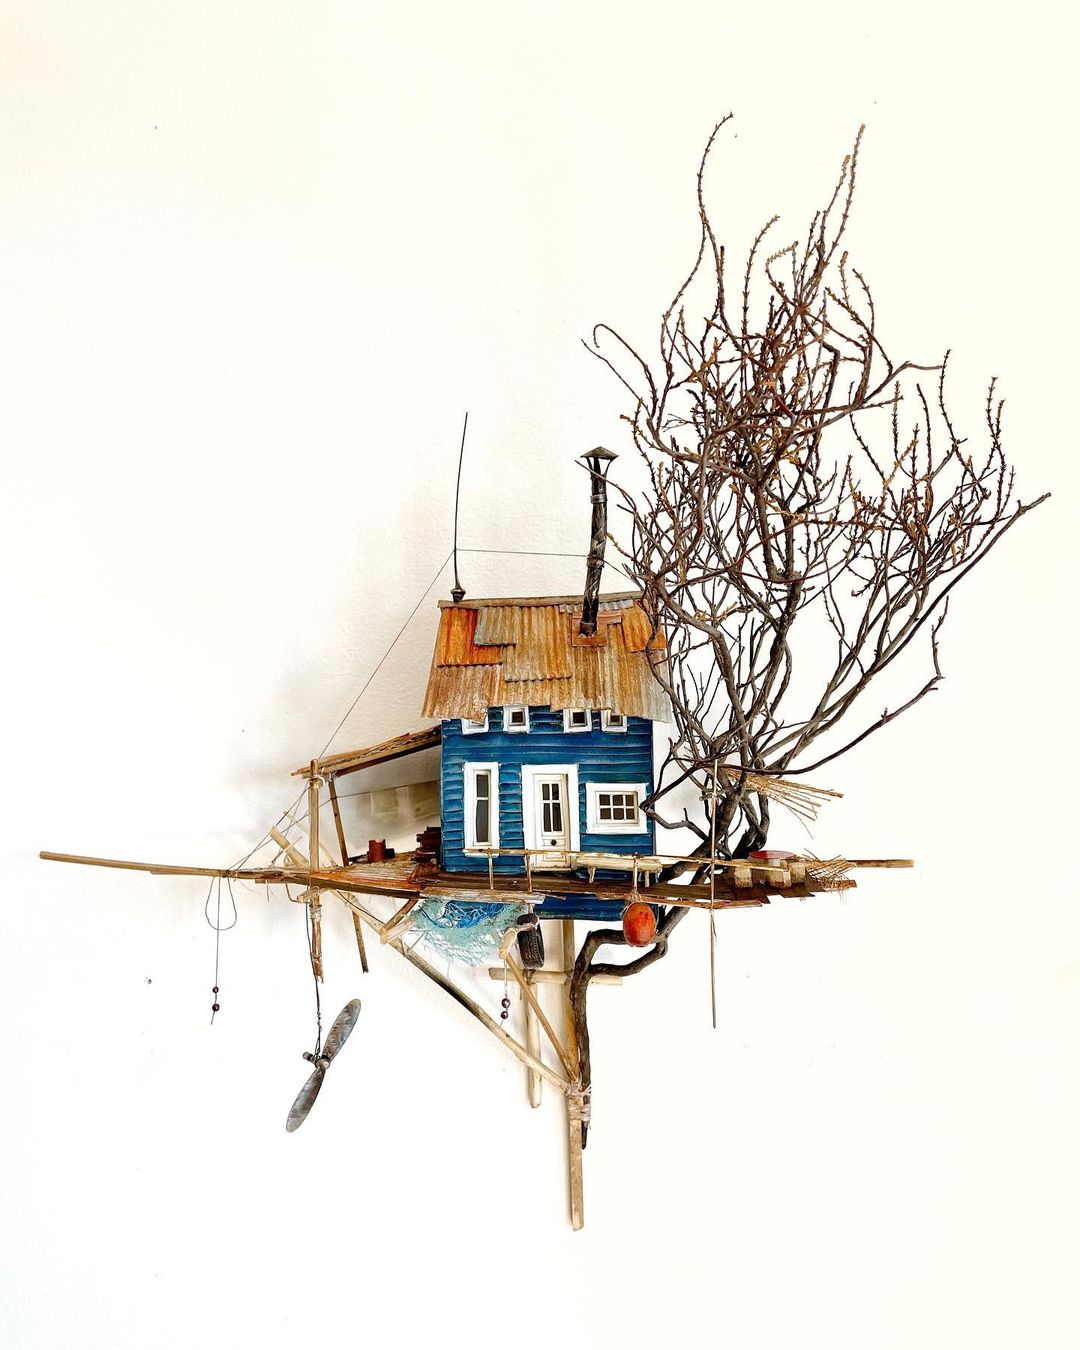 Miniature Ramshackle Cabins By David Mansot (18)